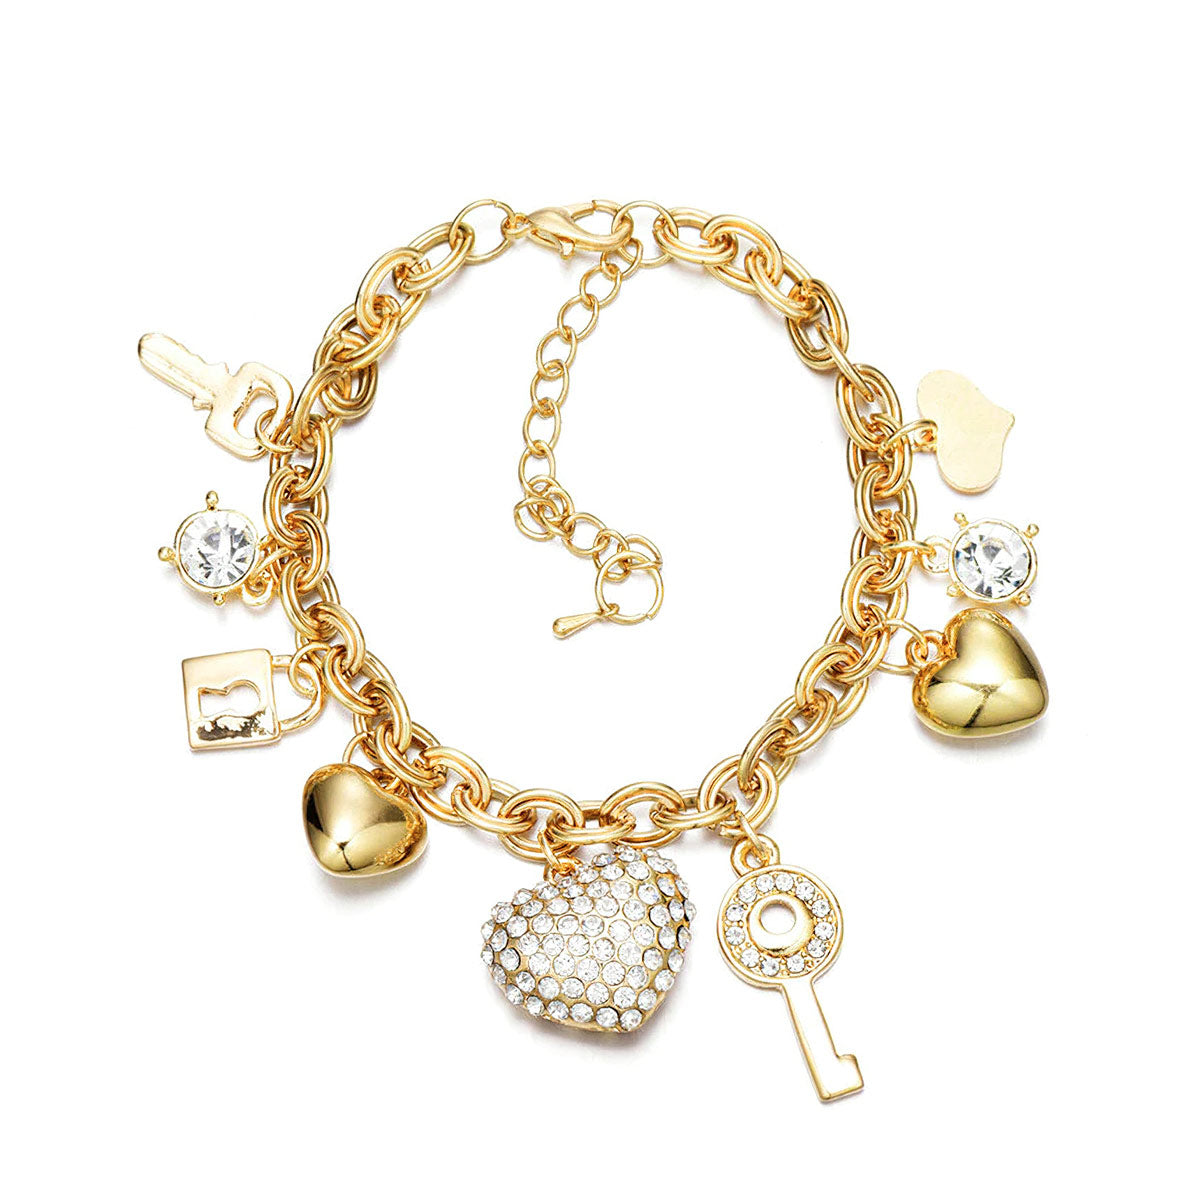 Love Locked Gold Charm Bracelet with Free Matching Necklace ($30 Value)